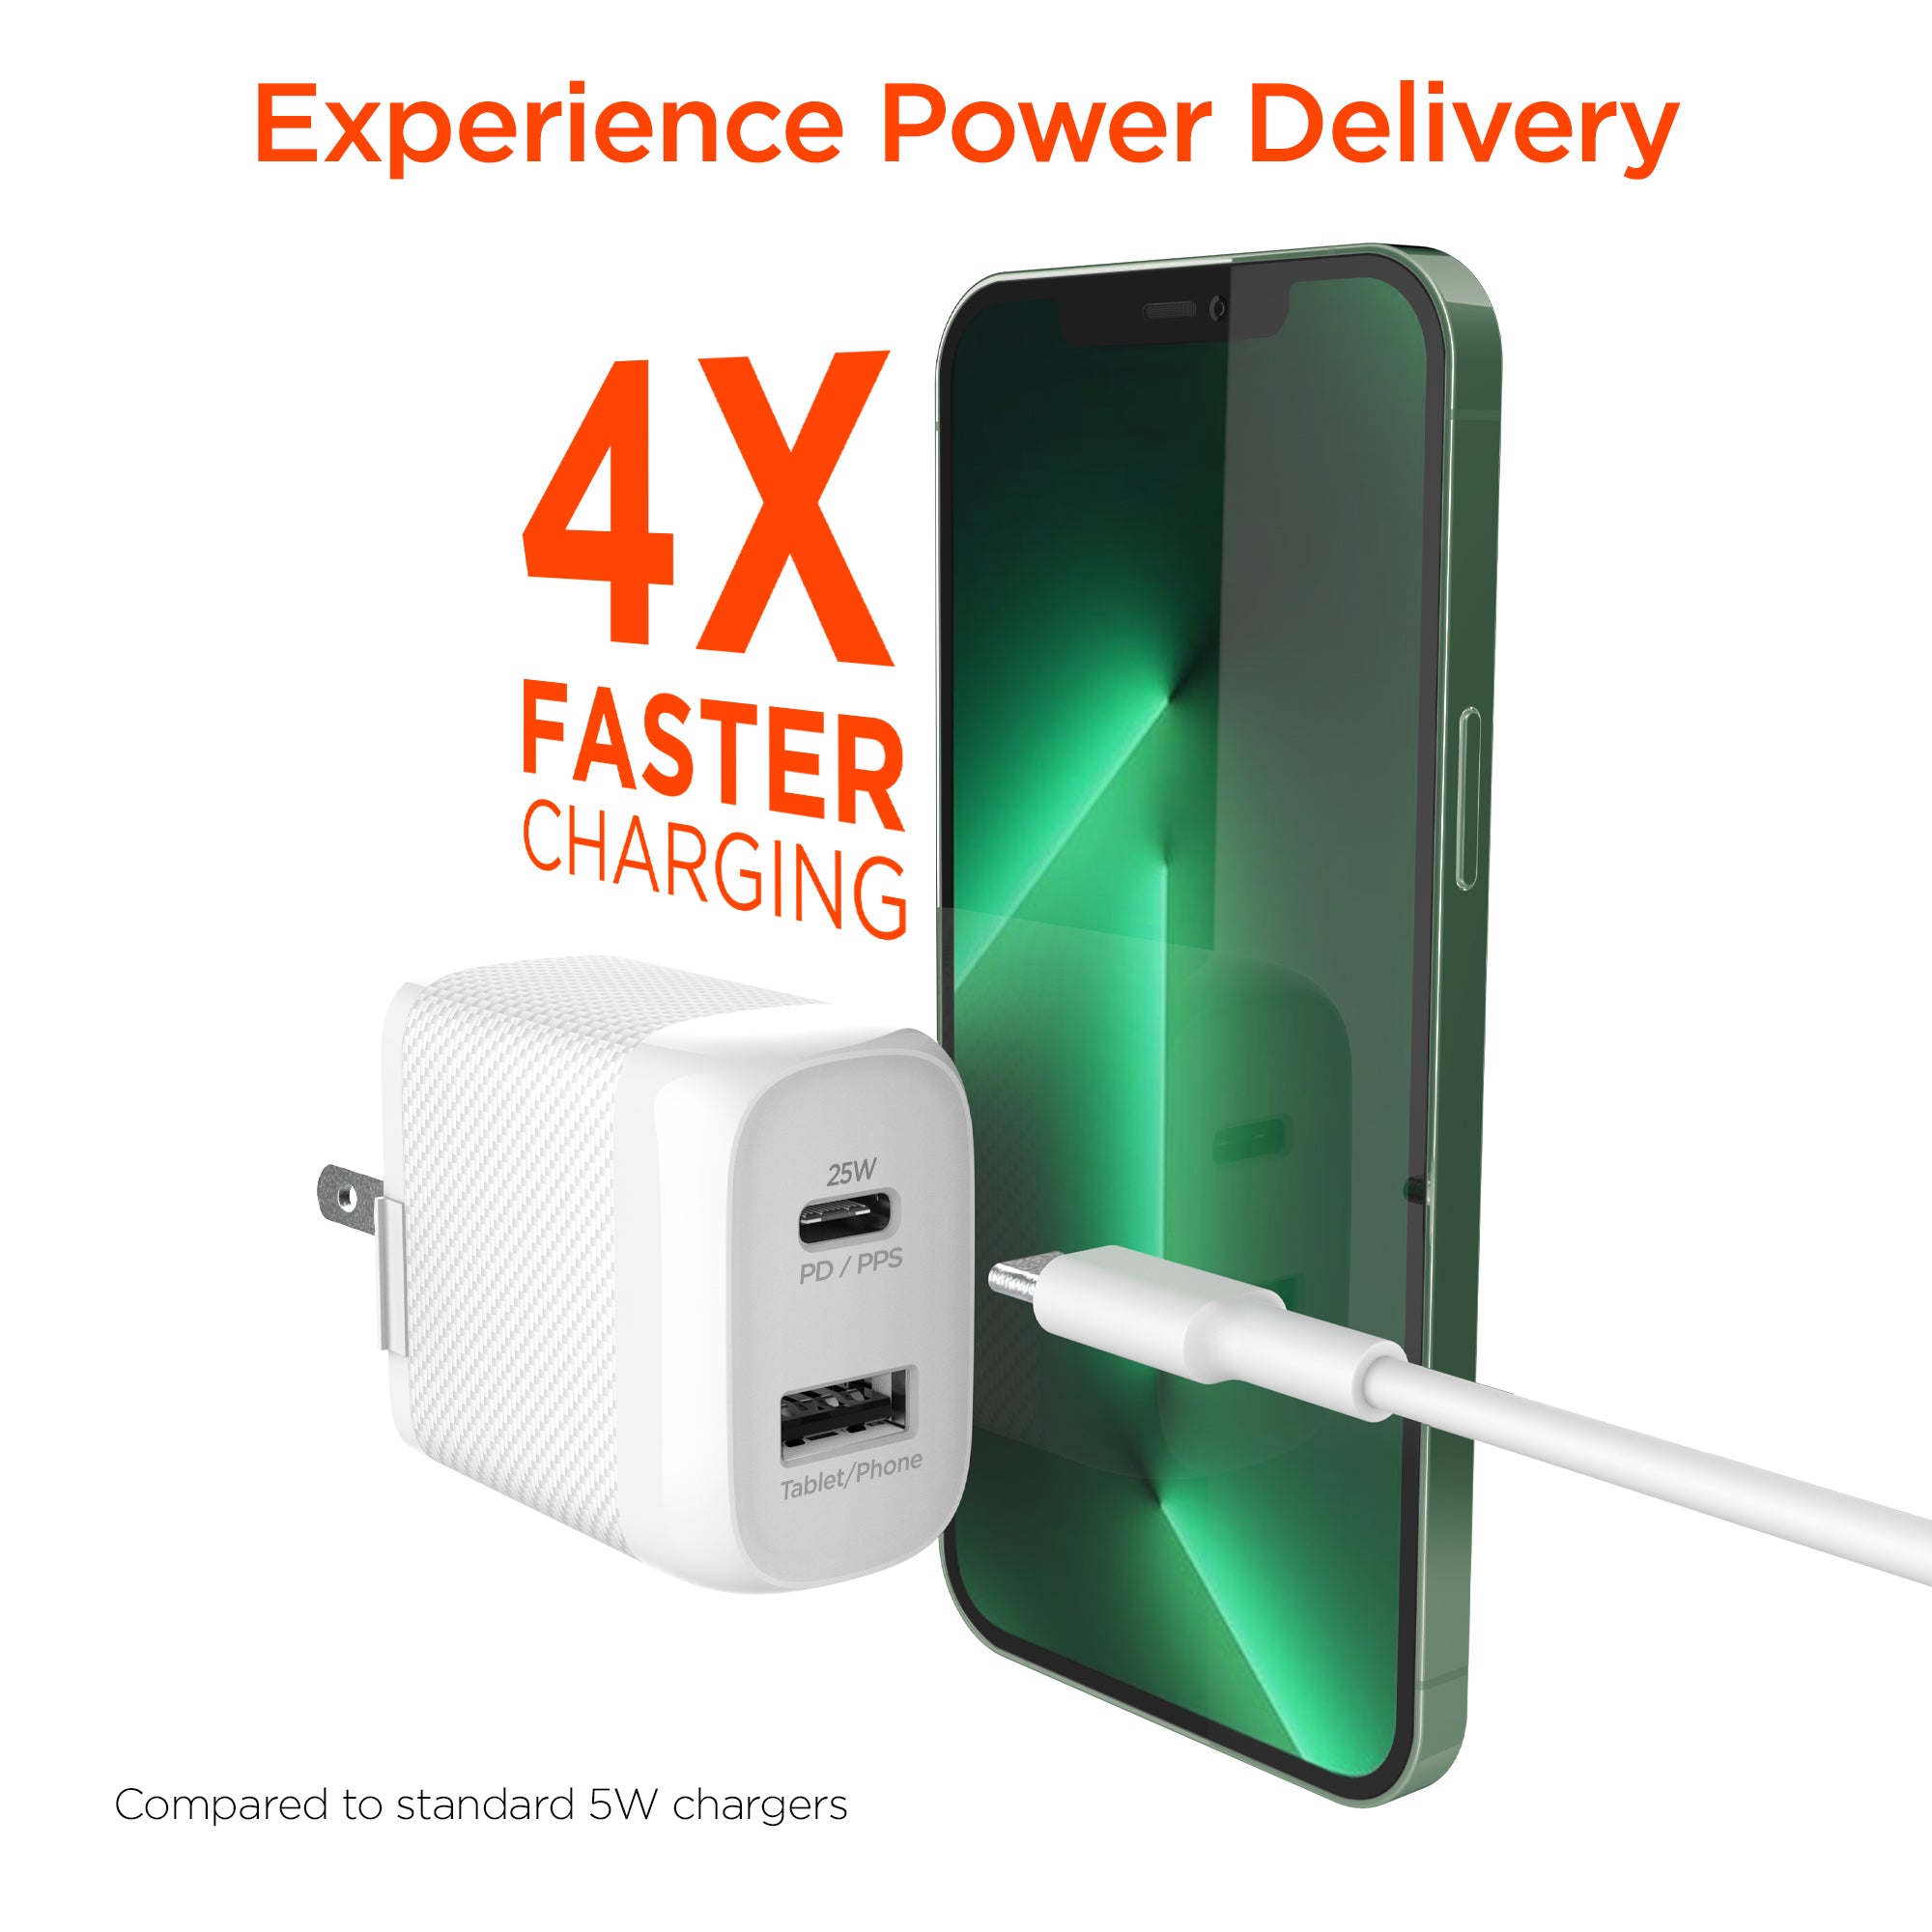 SpeedBoost 25W USB-C PD + 12W USB Fast Wall Charger with PPS